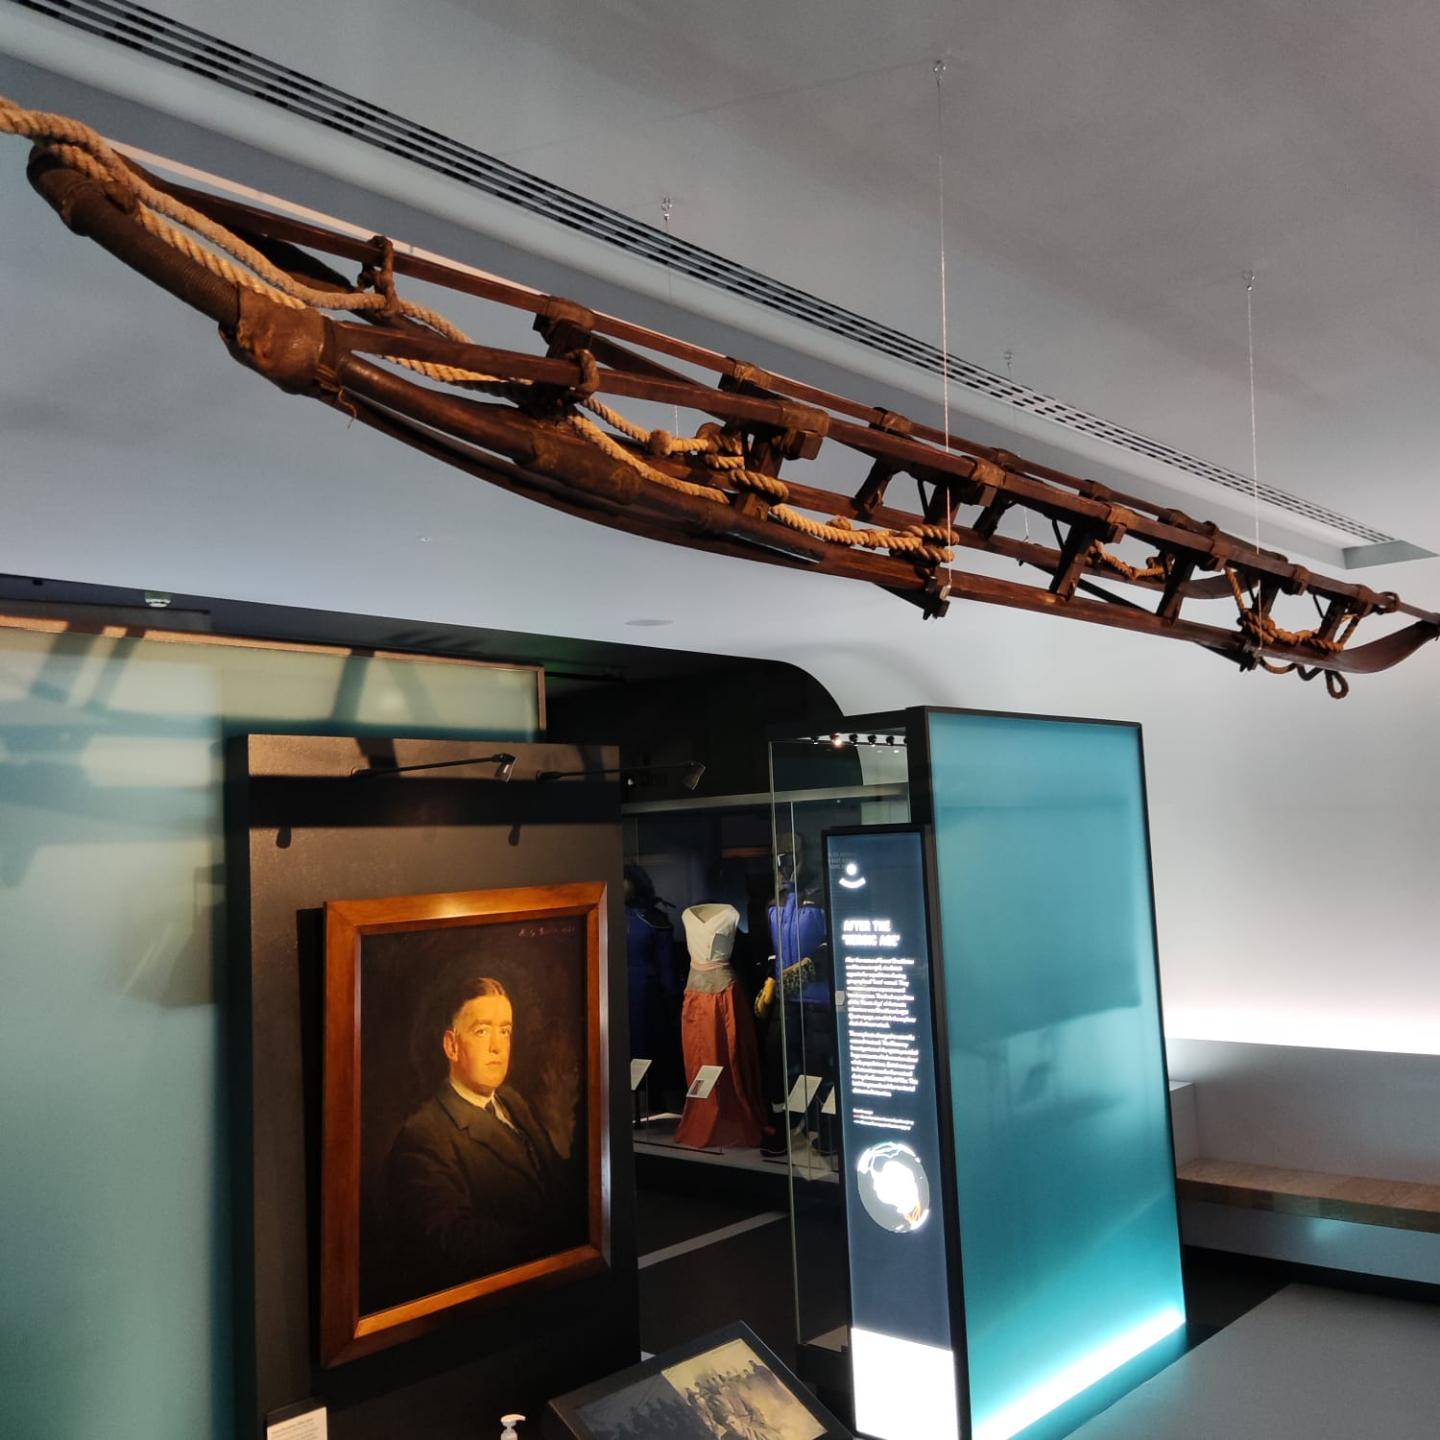 The sledge from Shackleton's Nimrod Expedition hanging in the Polar Worlds gallery at the National Maritime Museum above a portrait of Shackleton